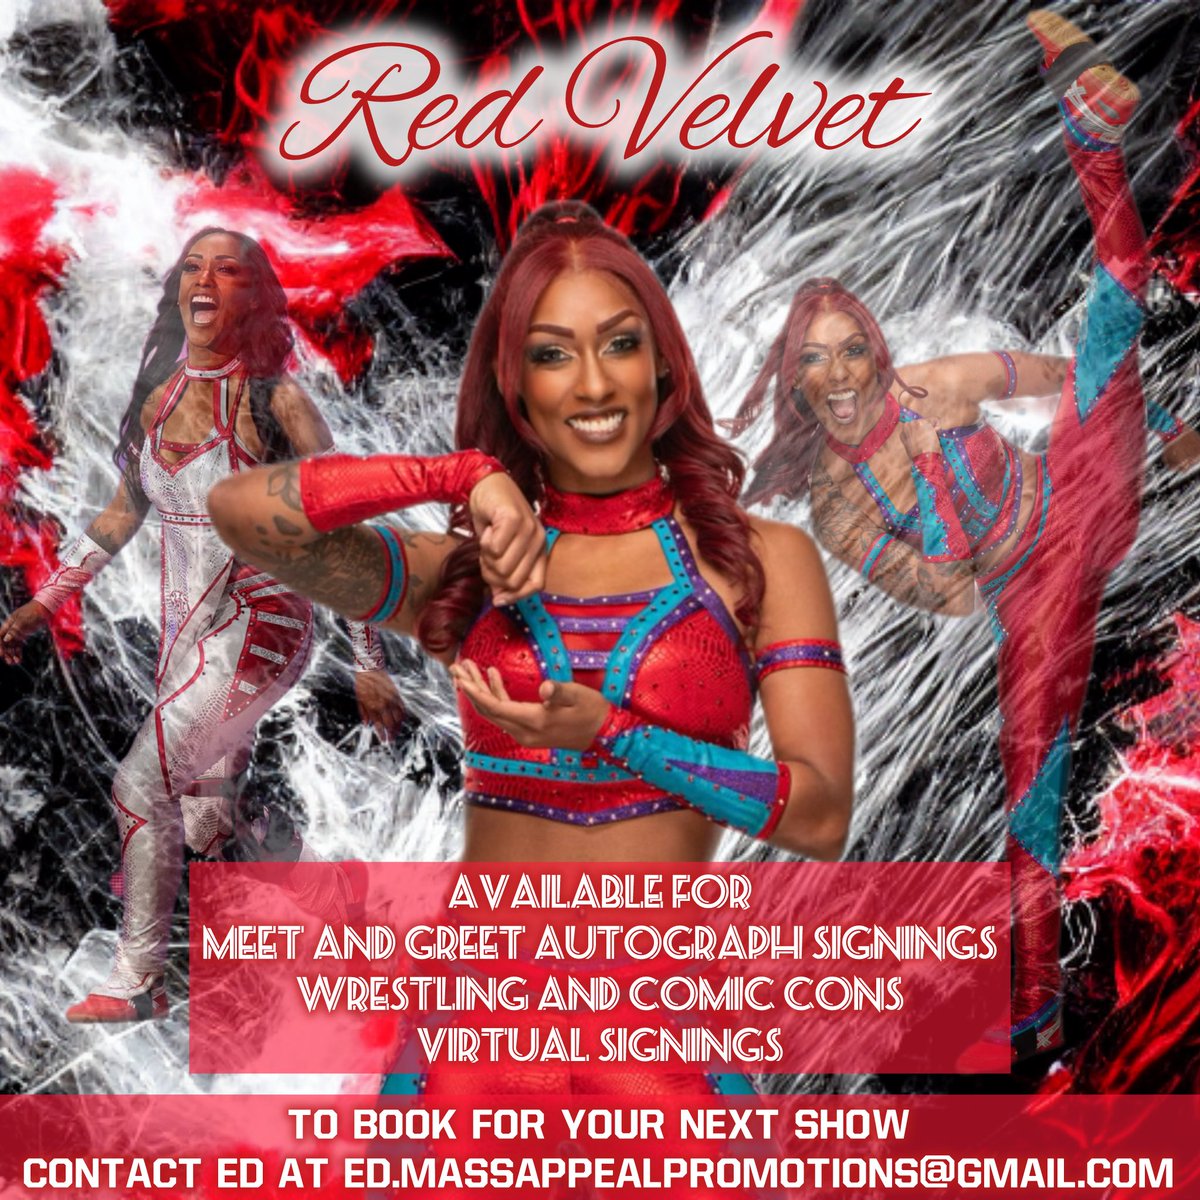 Attention Vendors/Promoters : If you are interested in having AEW/ROHs @Thee_Red_Velvet at your next show, con or store for a signing shoot me an email at ed.massappealpromotions@gmail.com SERIOUS INQUIRIES ONLY